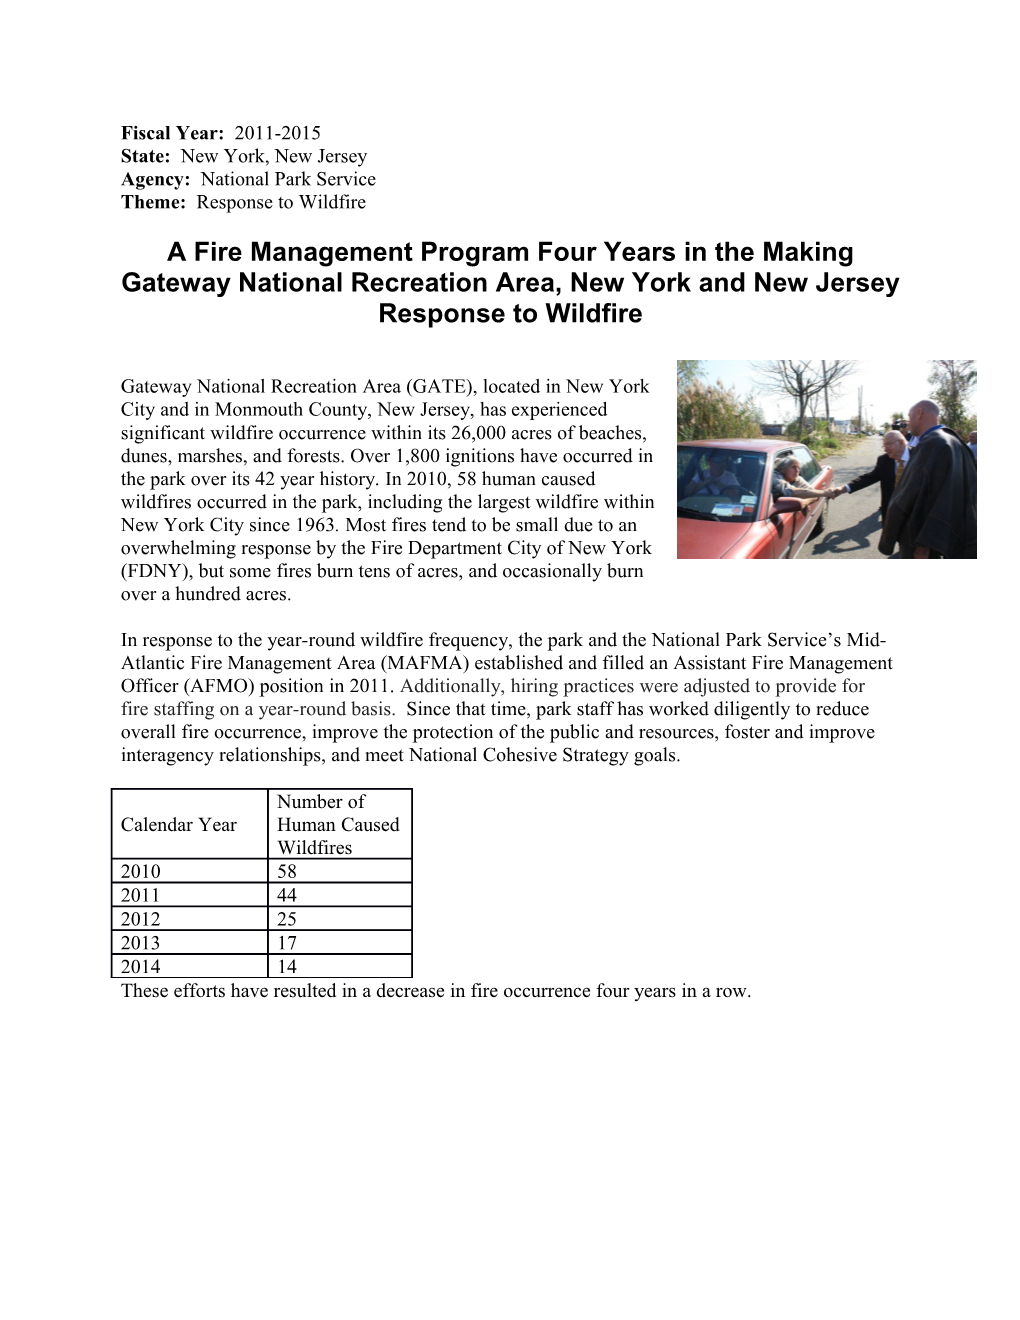 A Fire Management Program Four Years in the Making